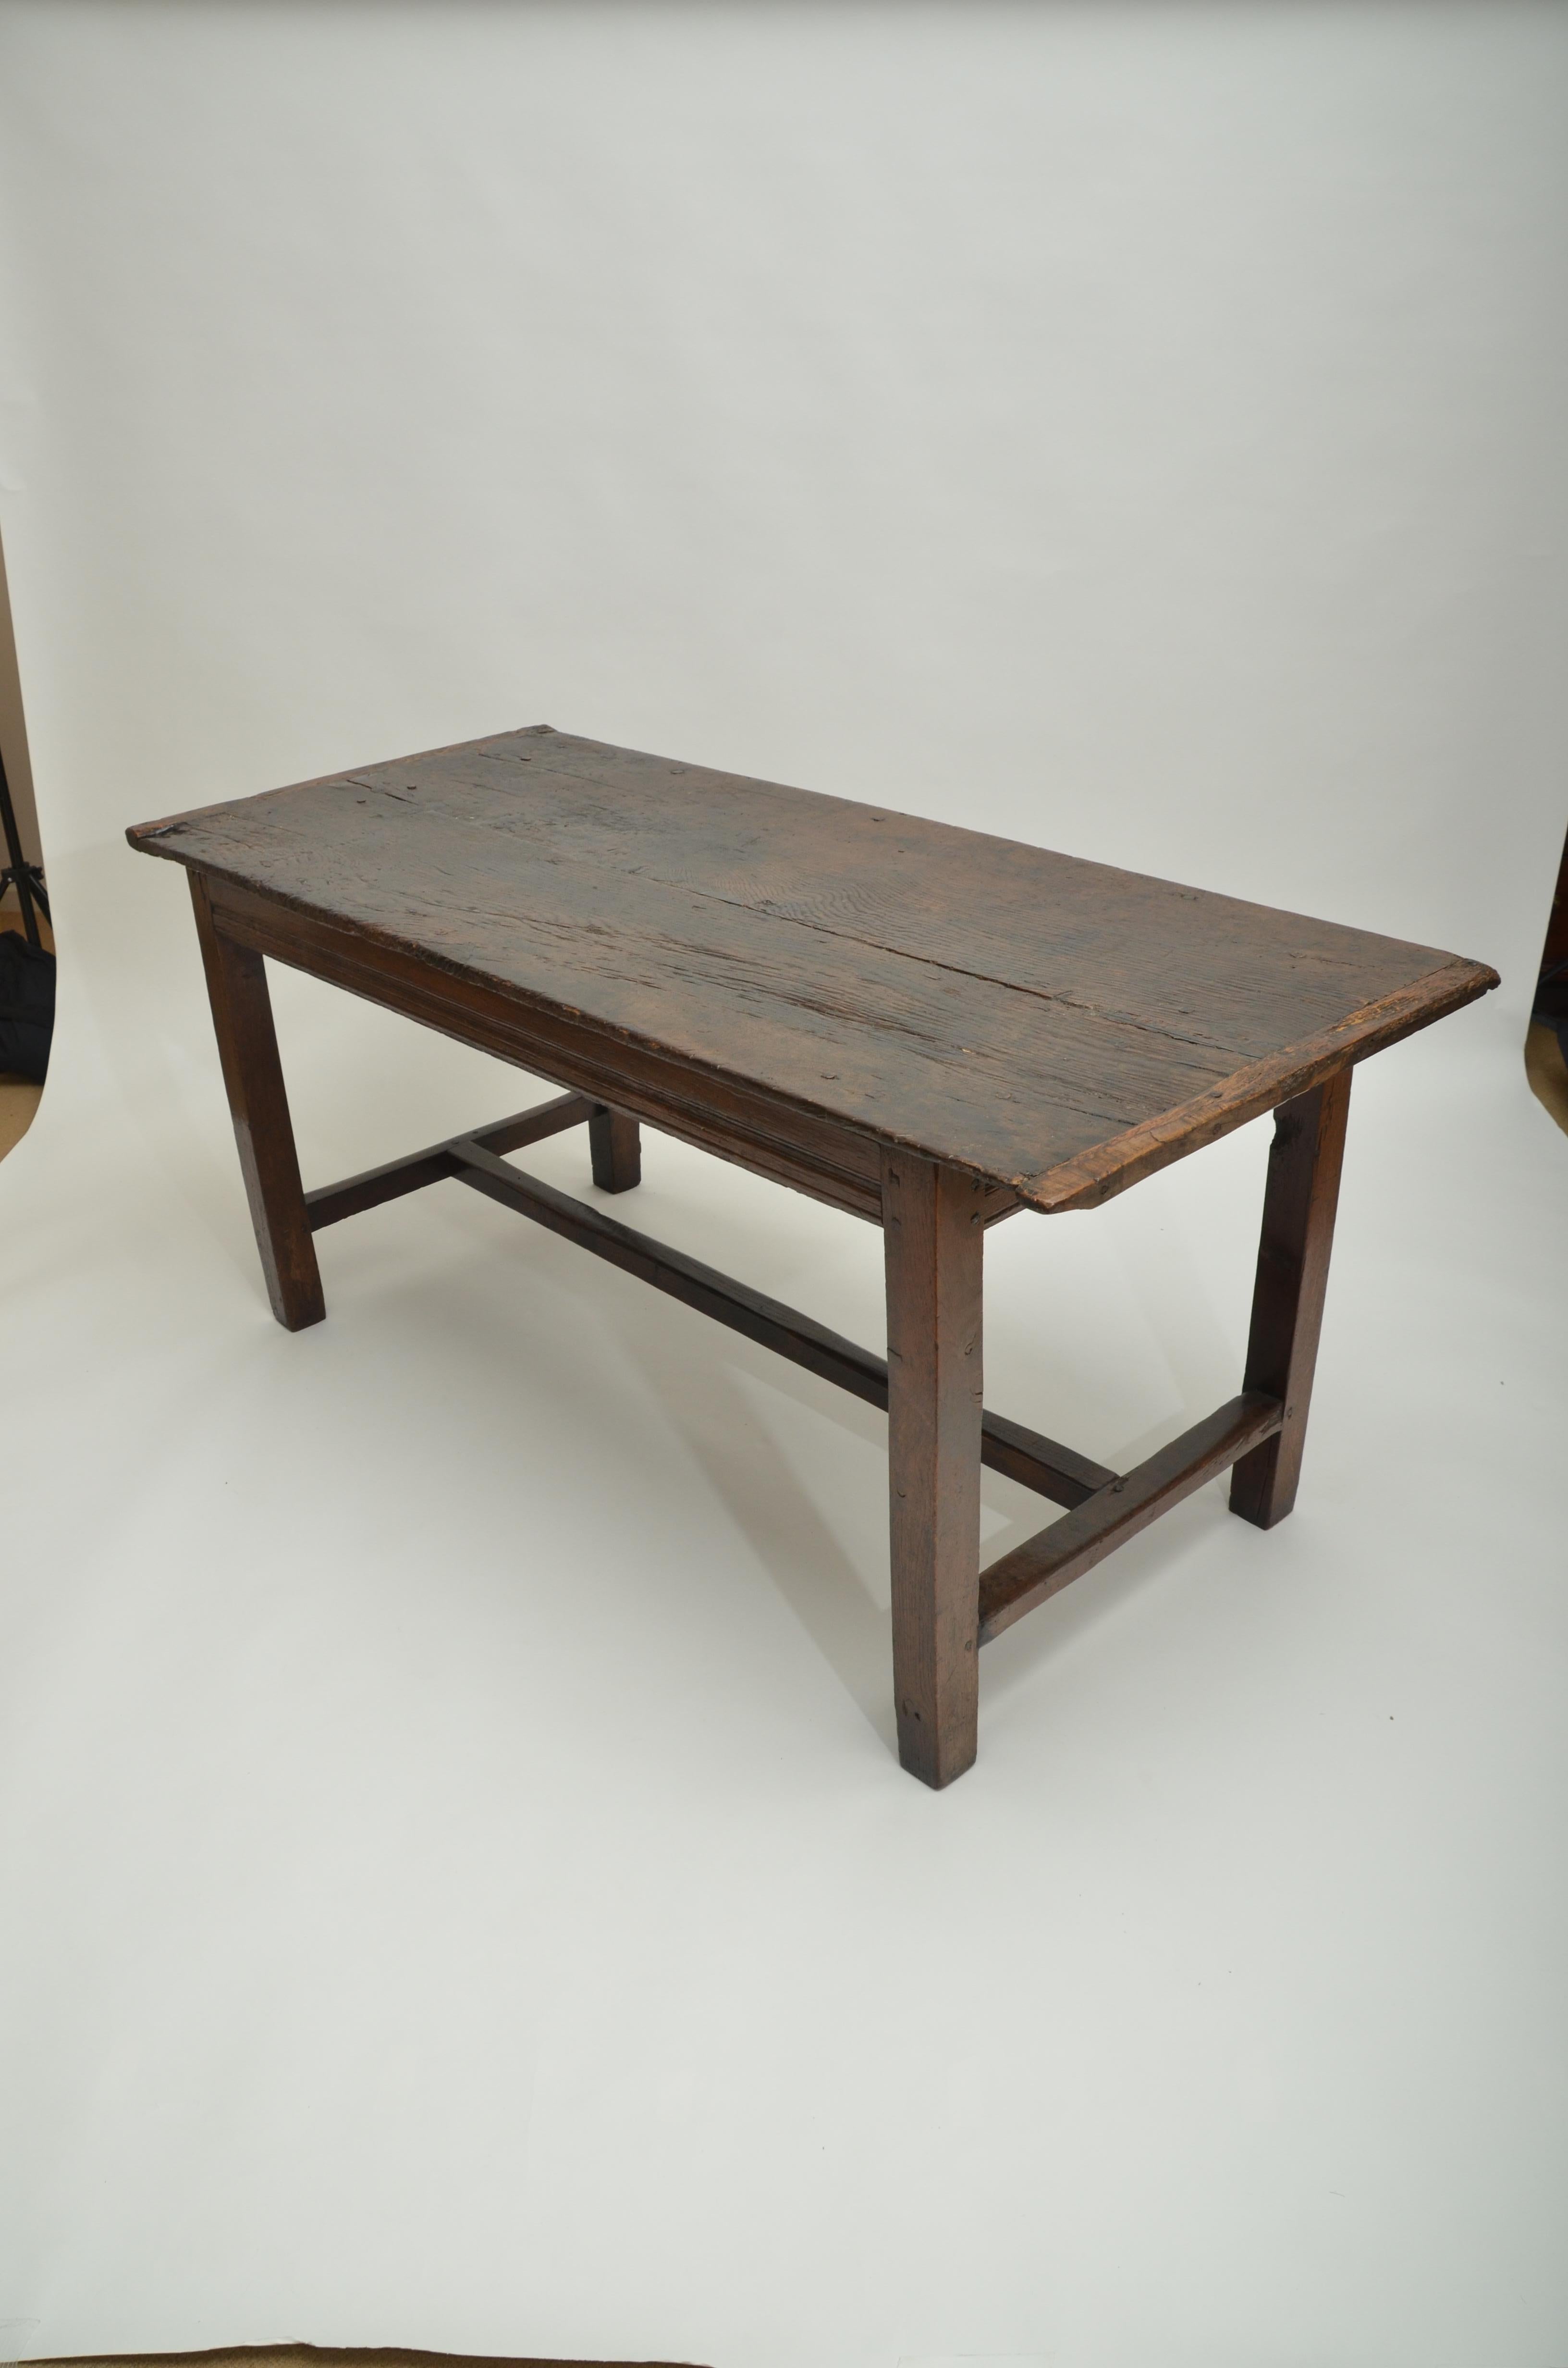 Oak and elm table with stretcher base, straight legs, 5 1/2